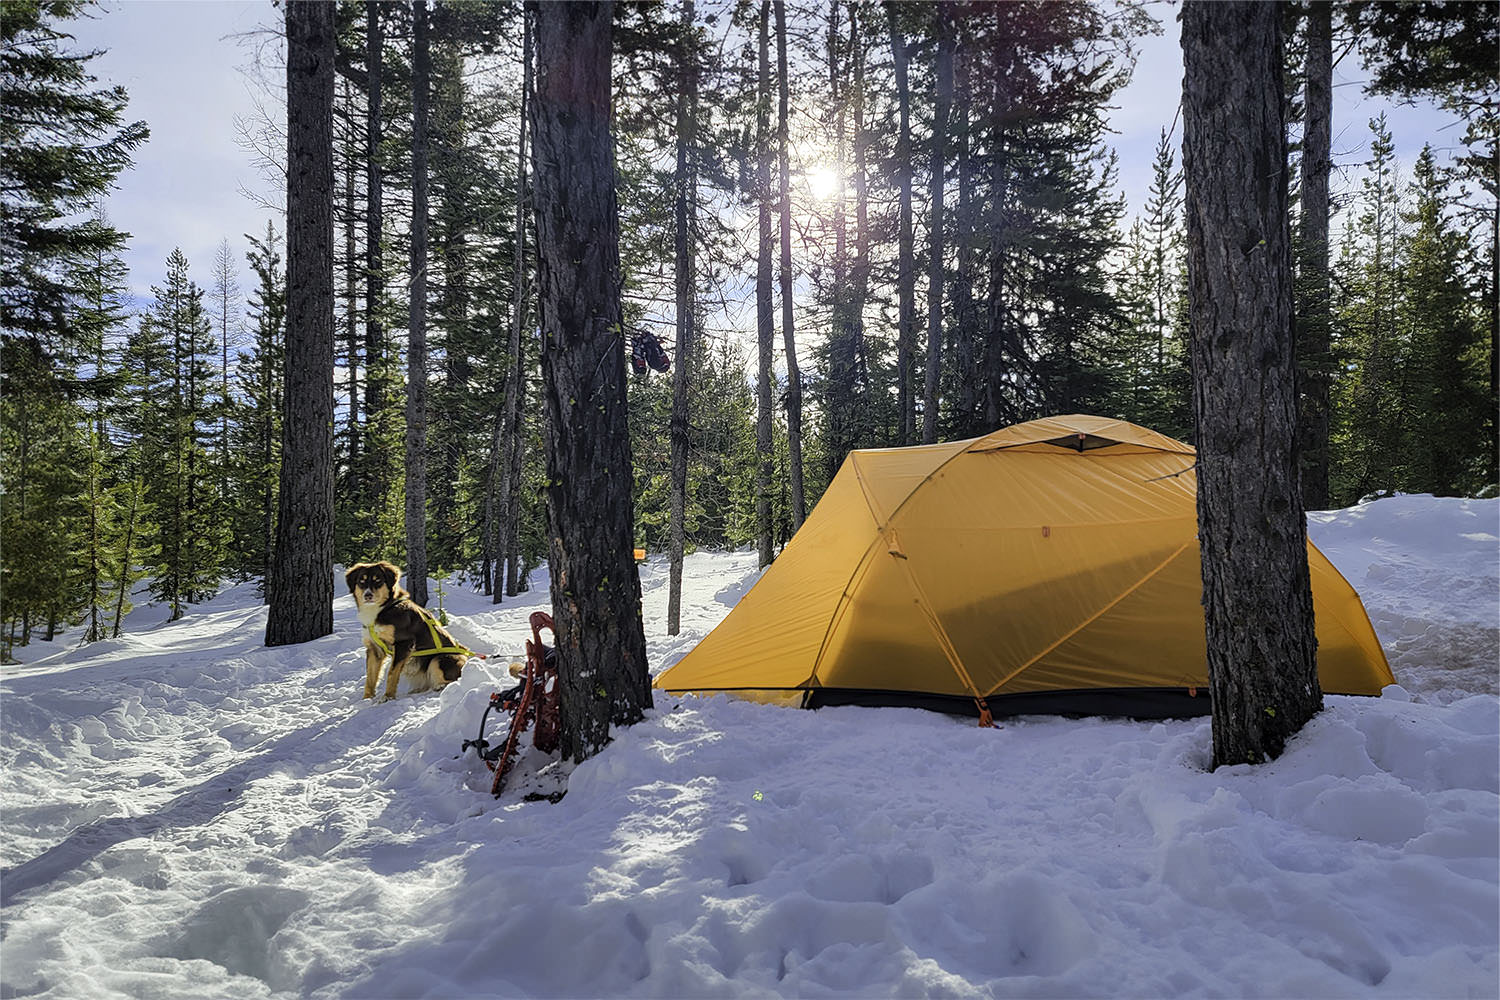 The NEMO Kunai 3P four-season tent in a snowy winter camping scene in the woods